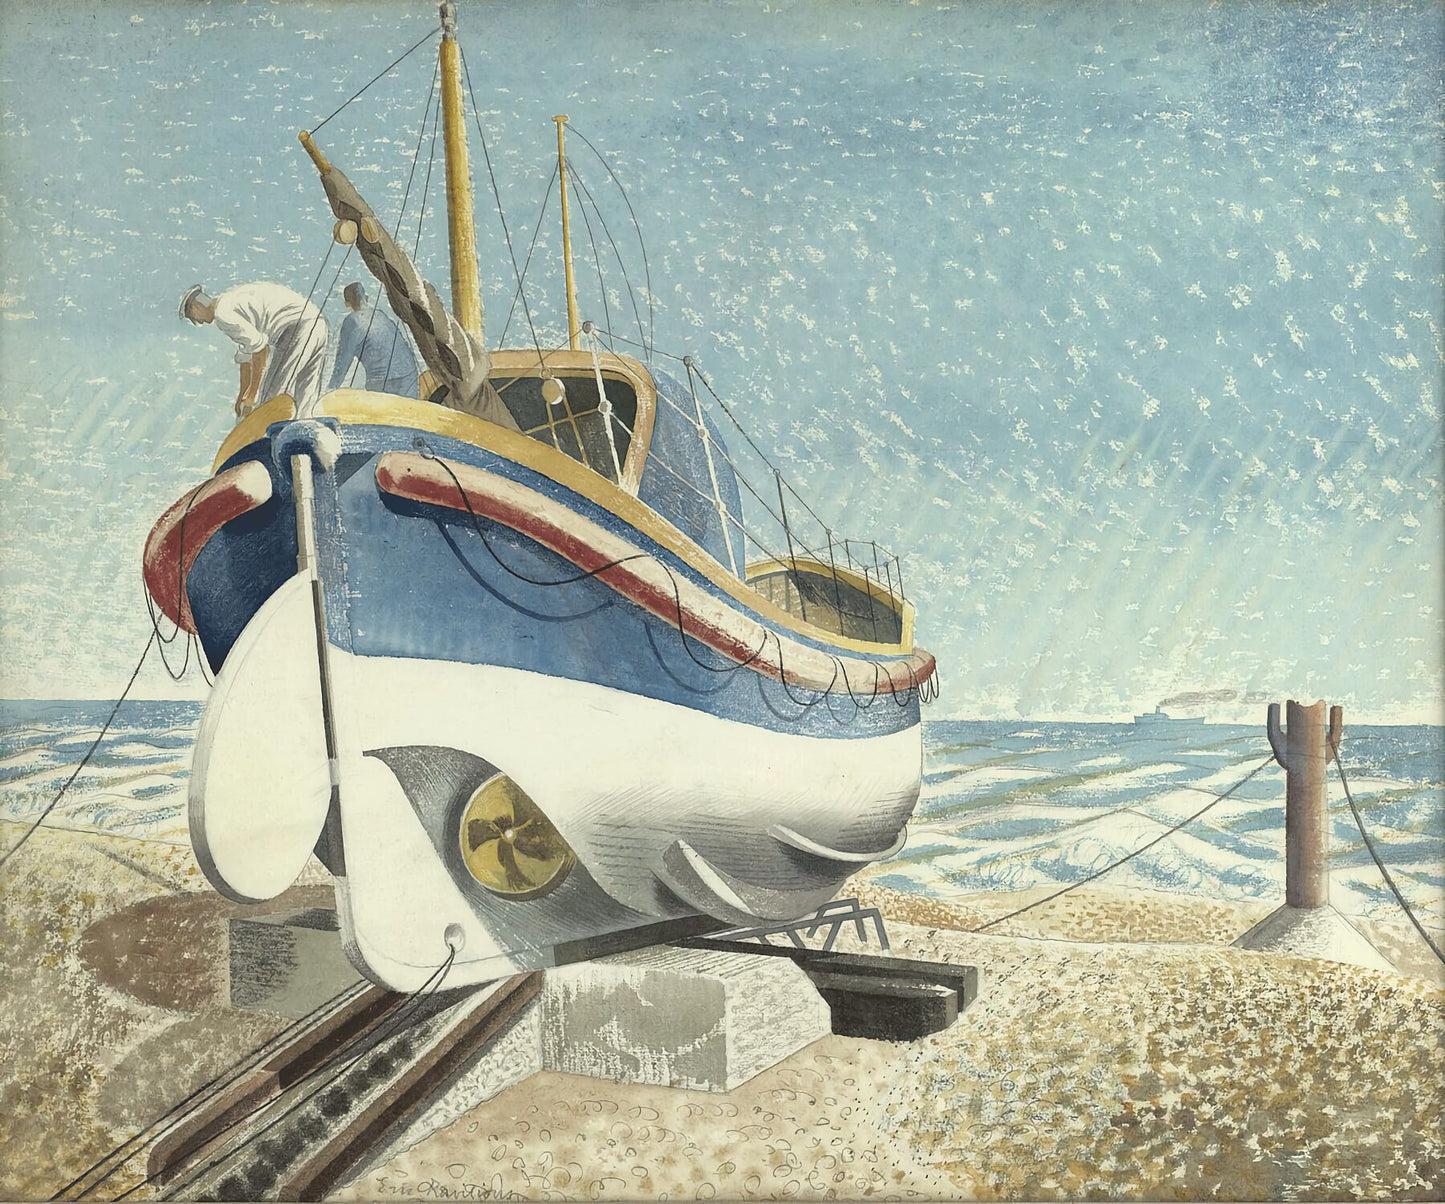 The Lifeboat by Eric Ravilious - 1938